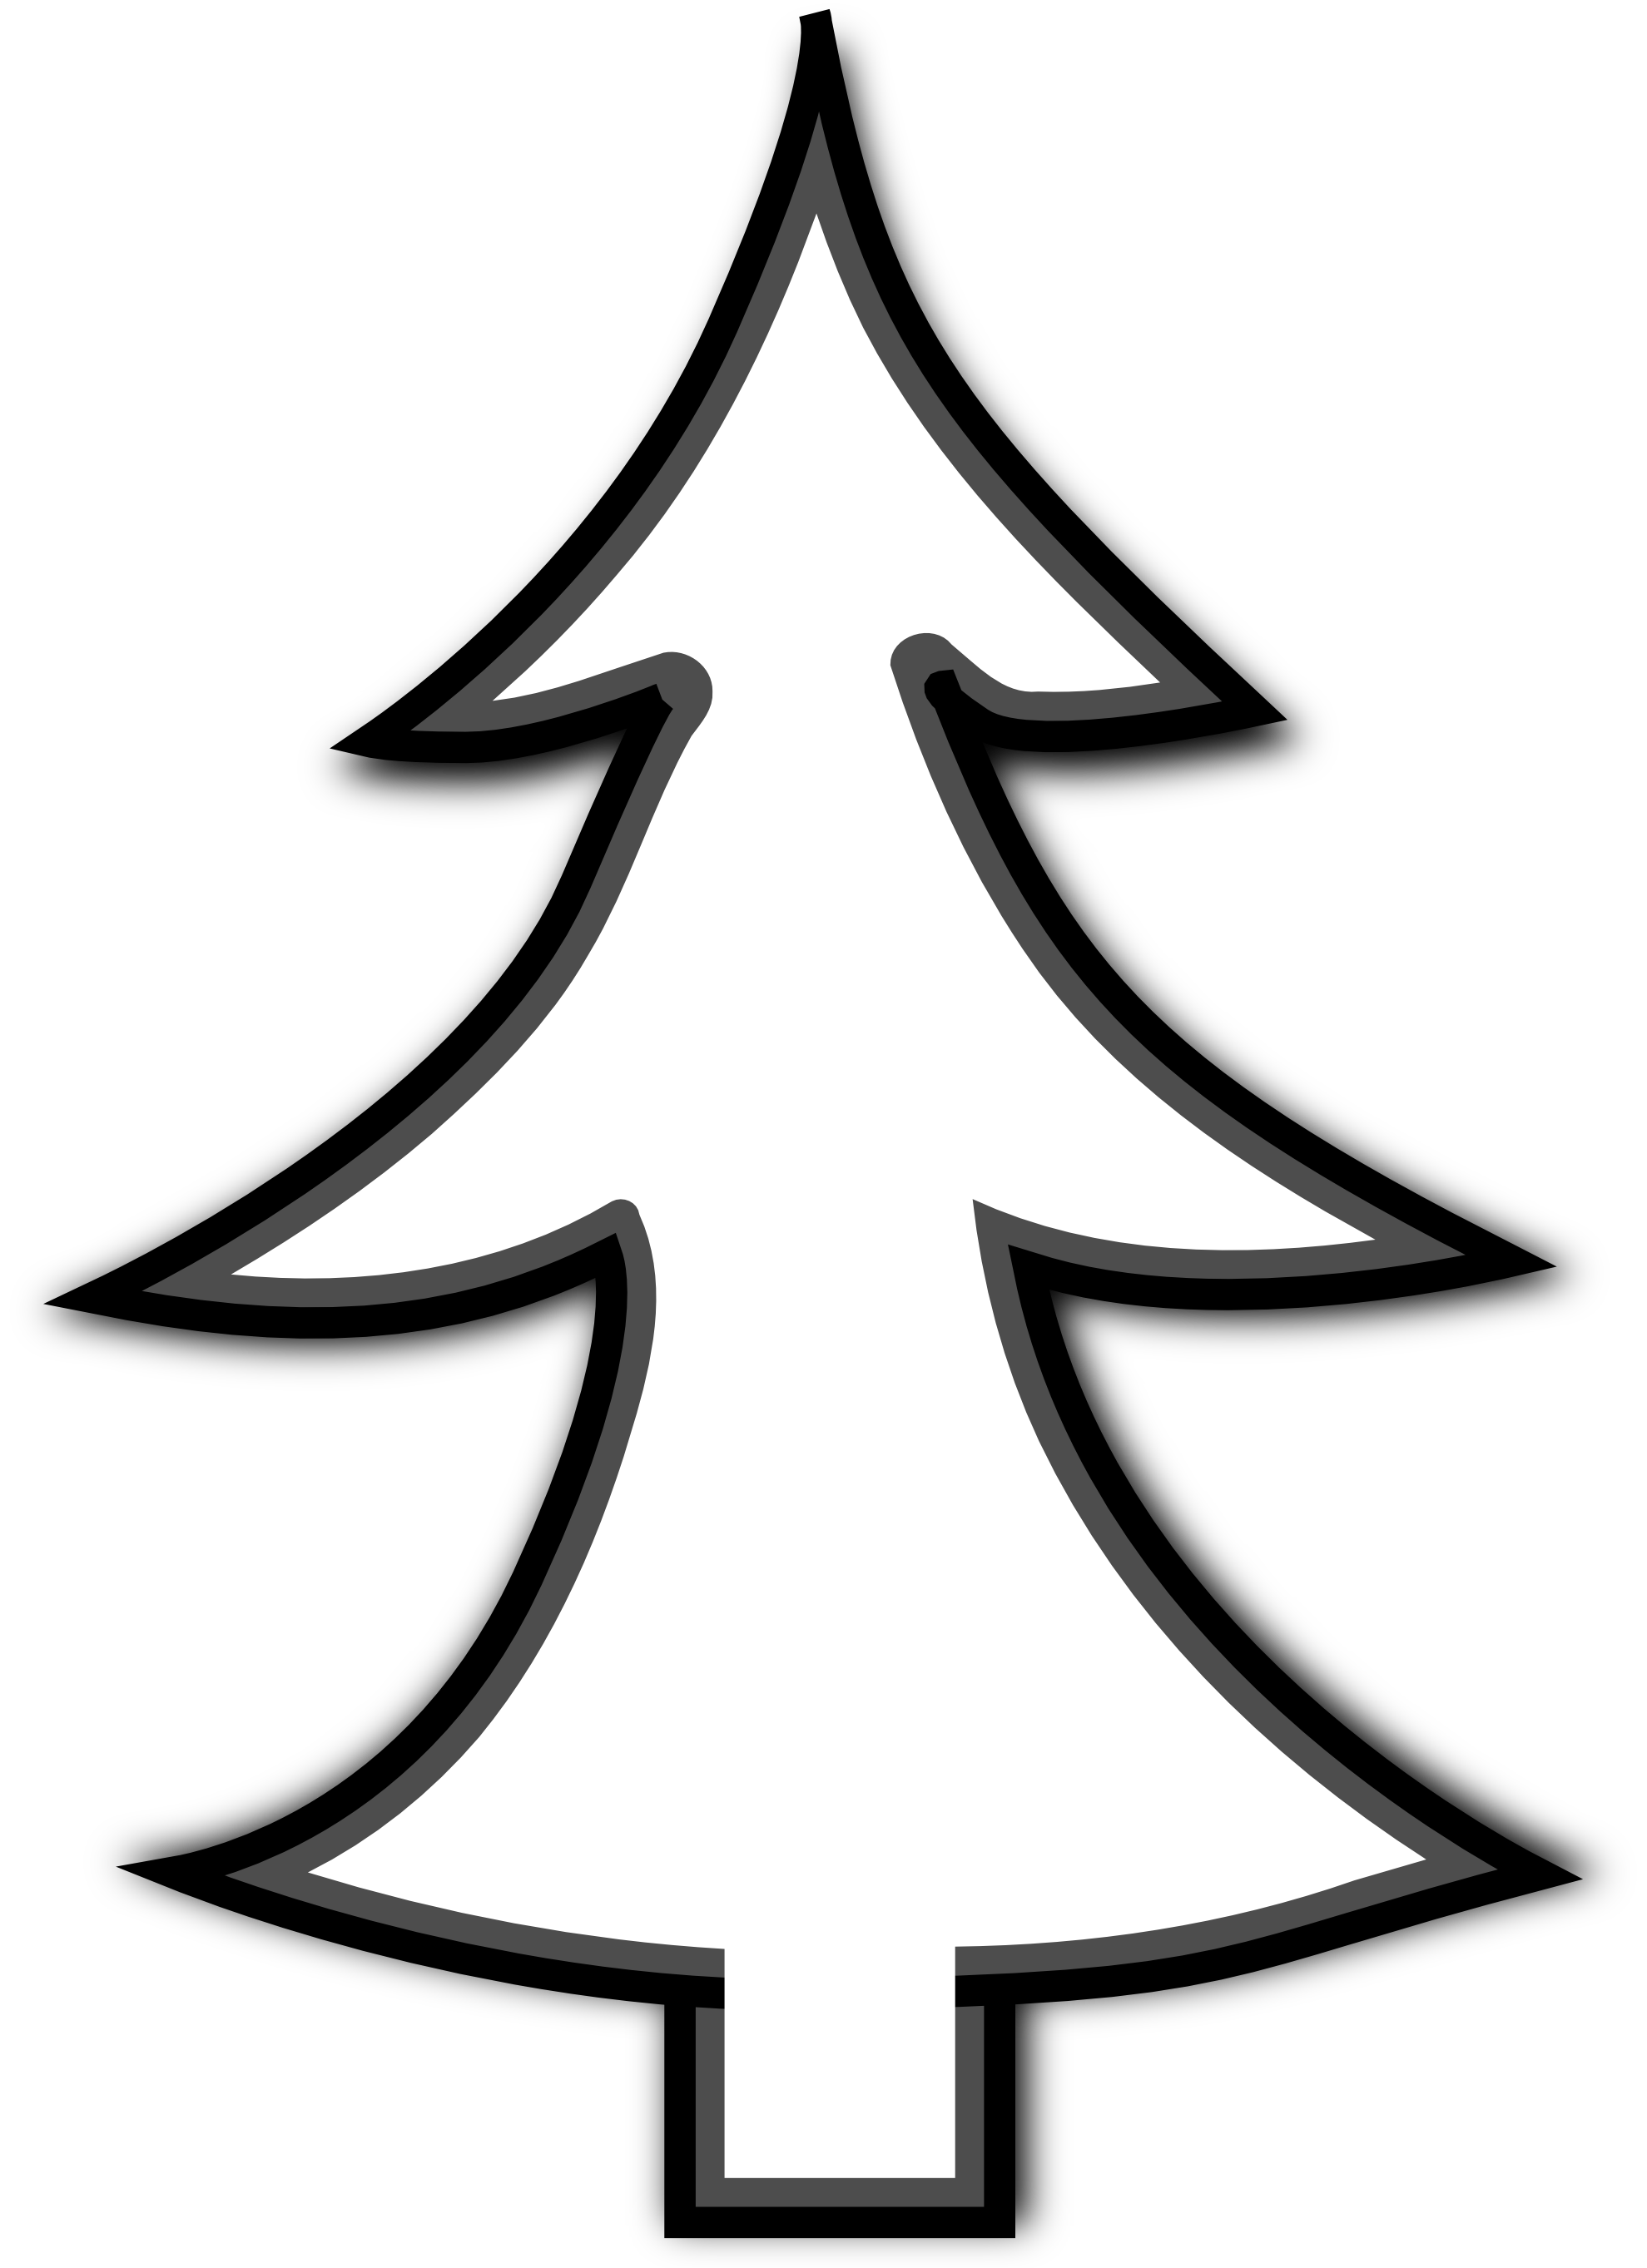 Christmas Tree Silhouette Clip Art - Cliparts.co